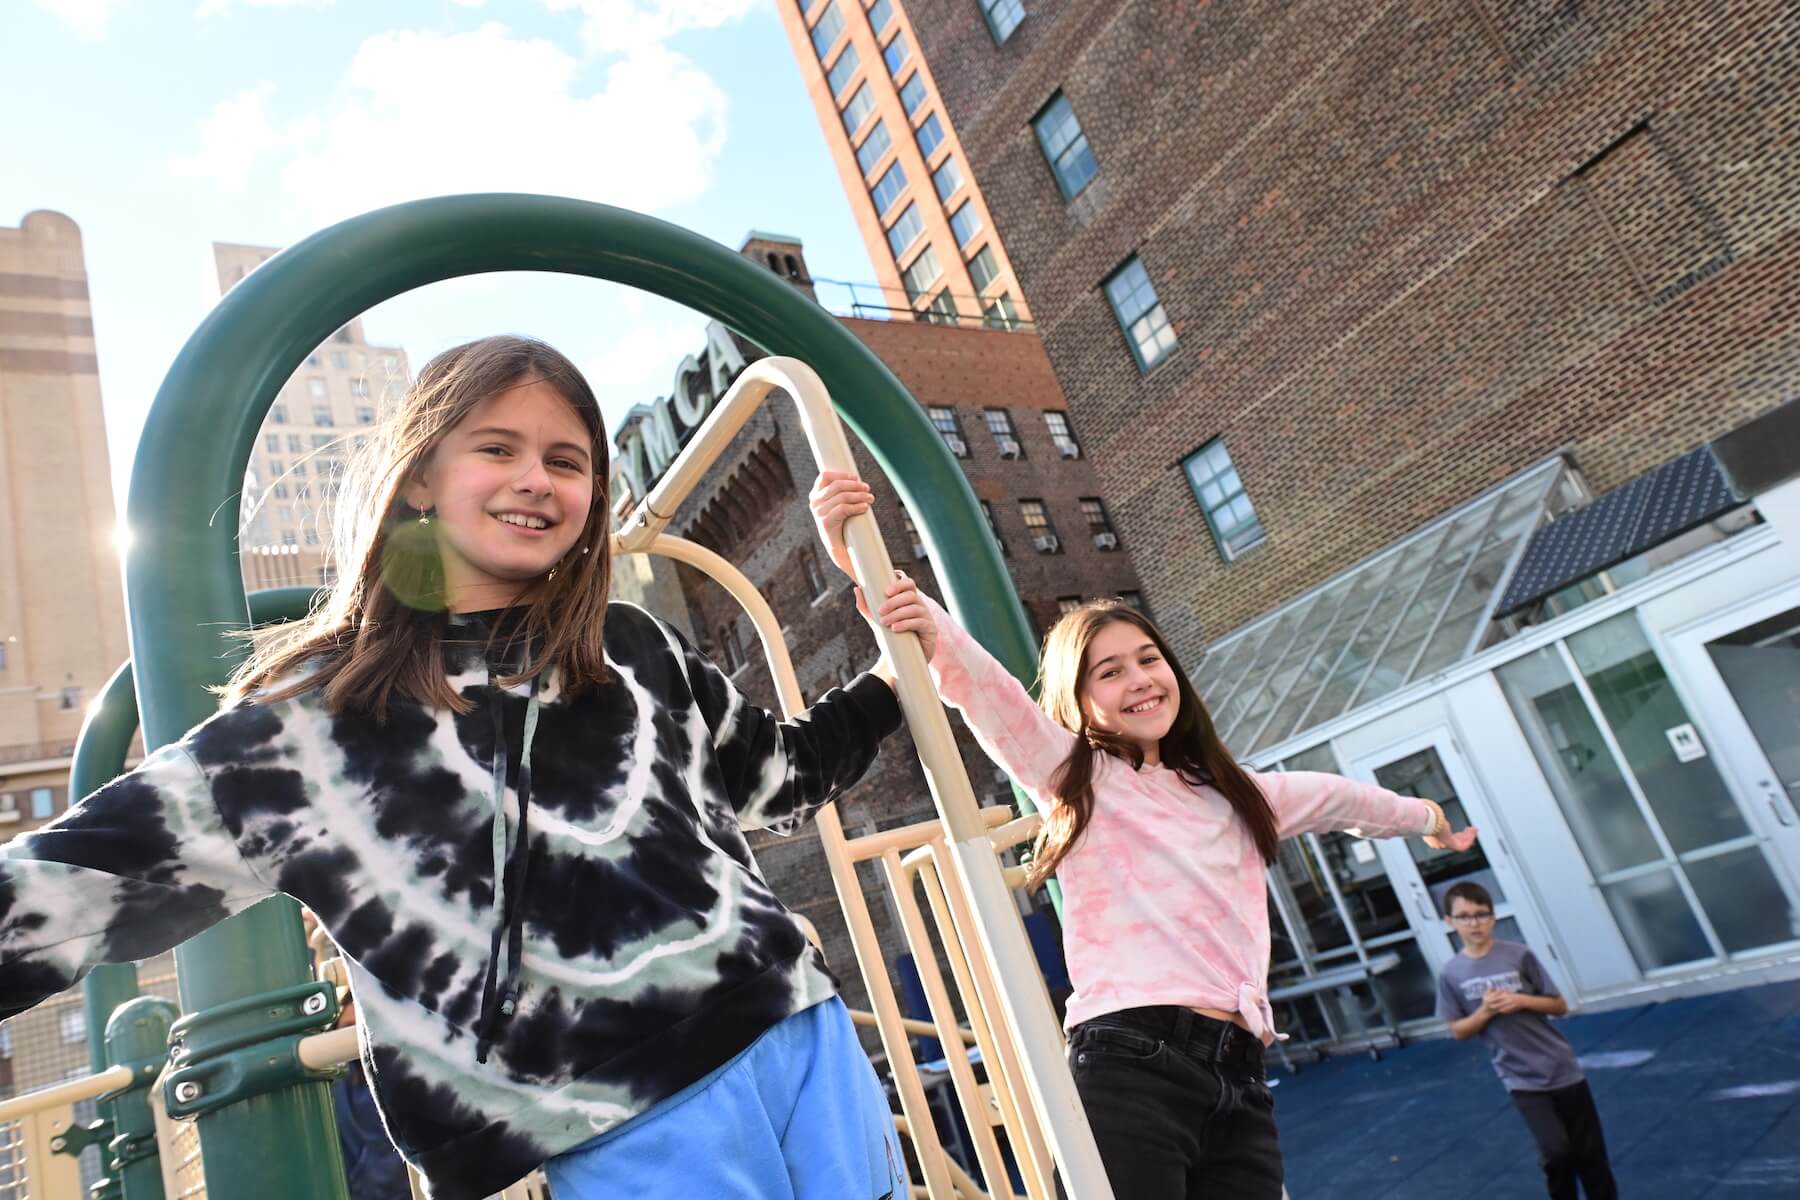 Ethical Culture Fieldston School_Feel Good Photos_Ethical Culture students swing on the playground bars